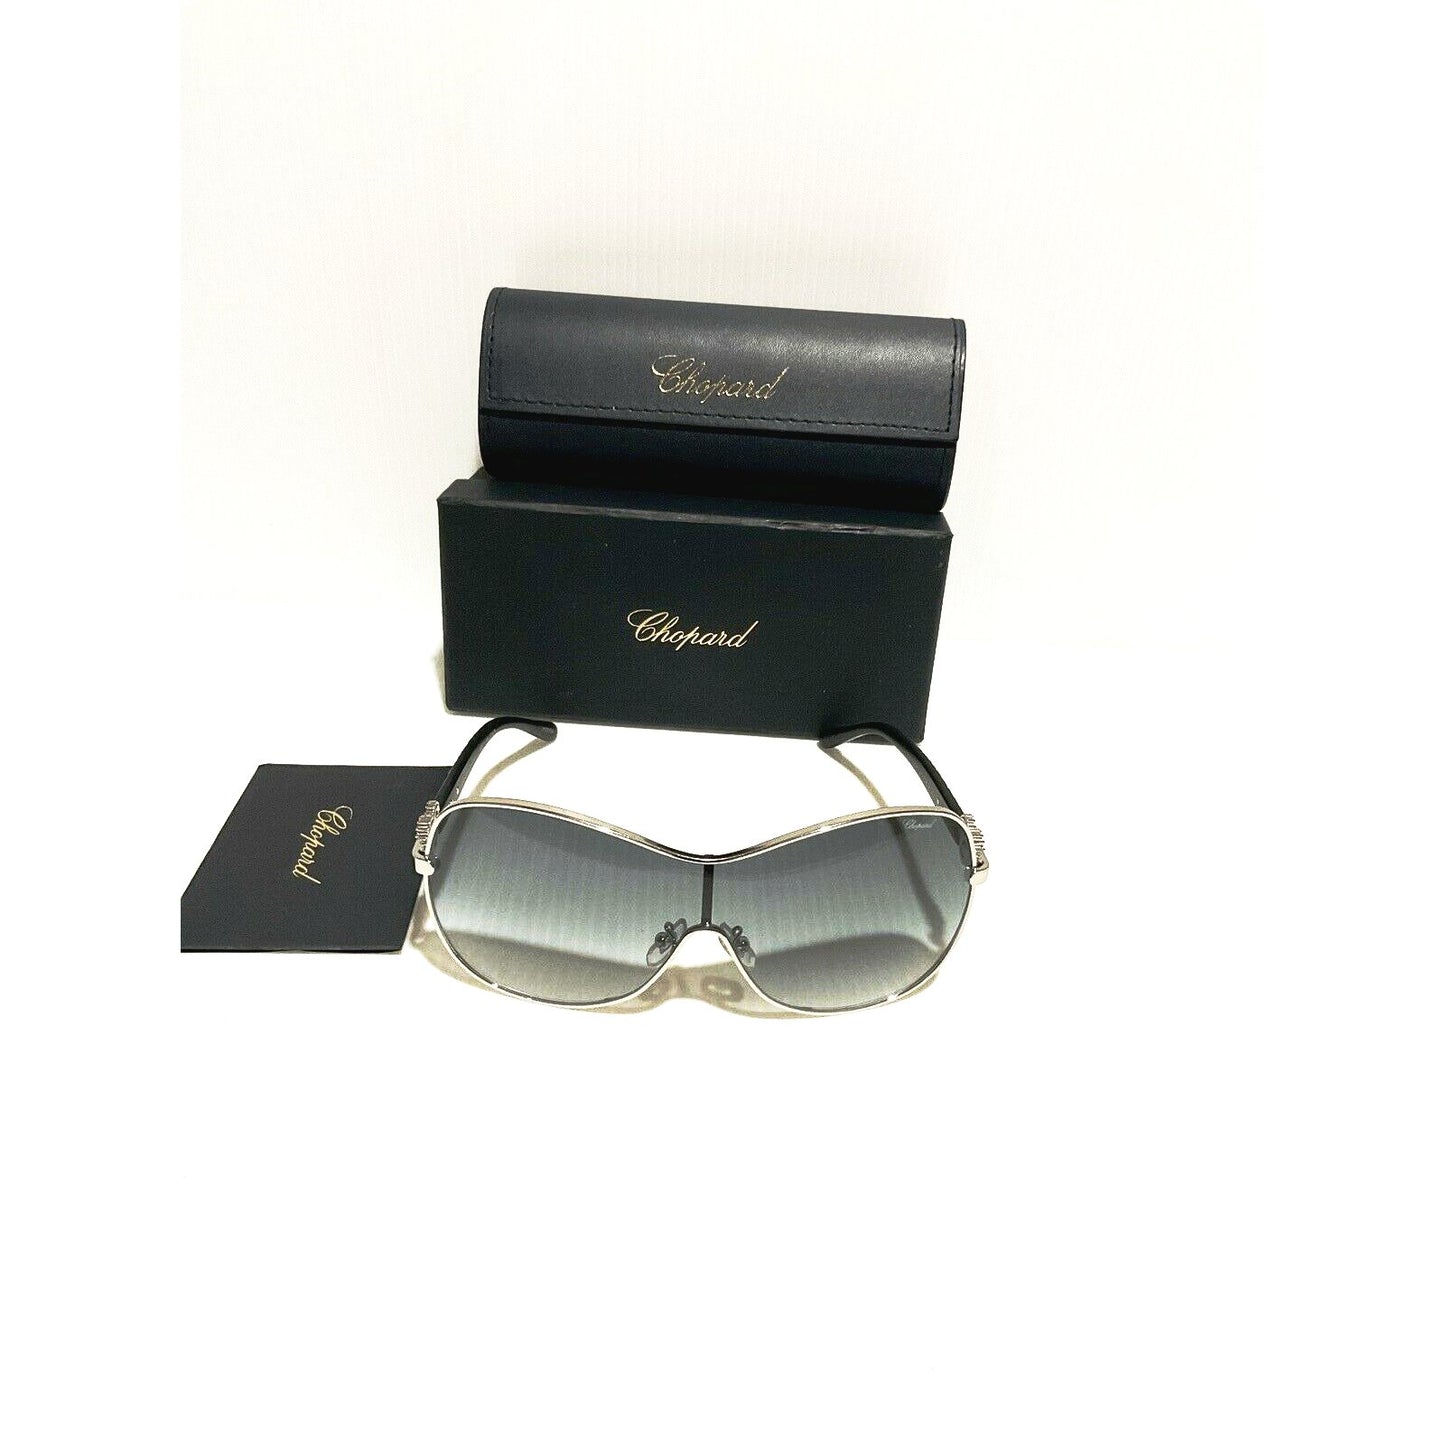 Chopard women sunglasses schc 25s 99 0579 Butterfly Made in Italy